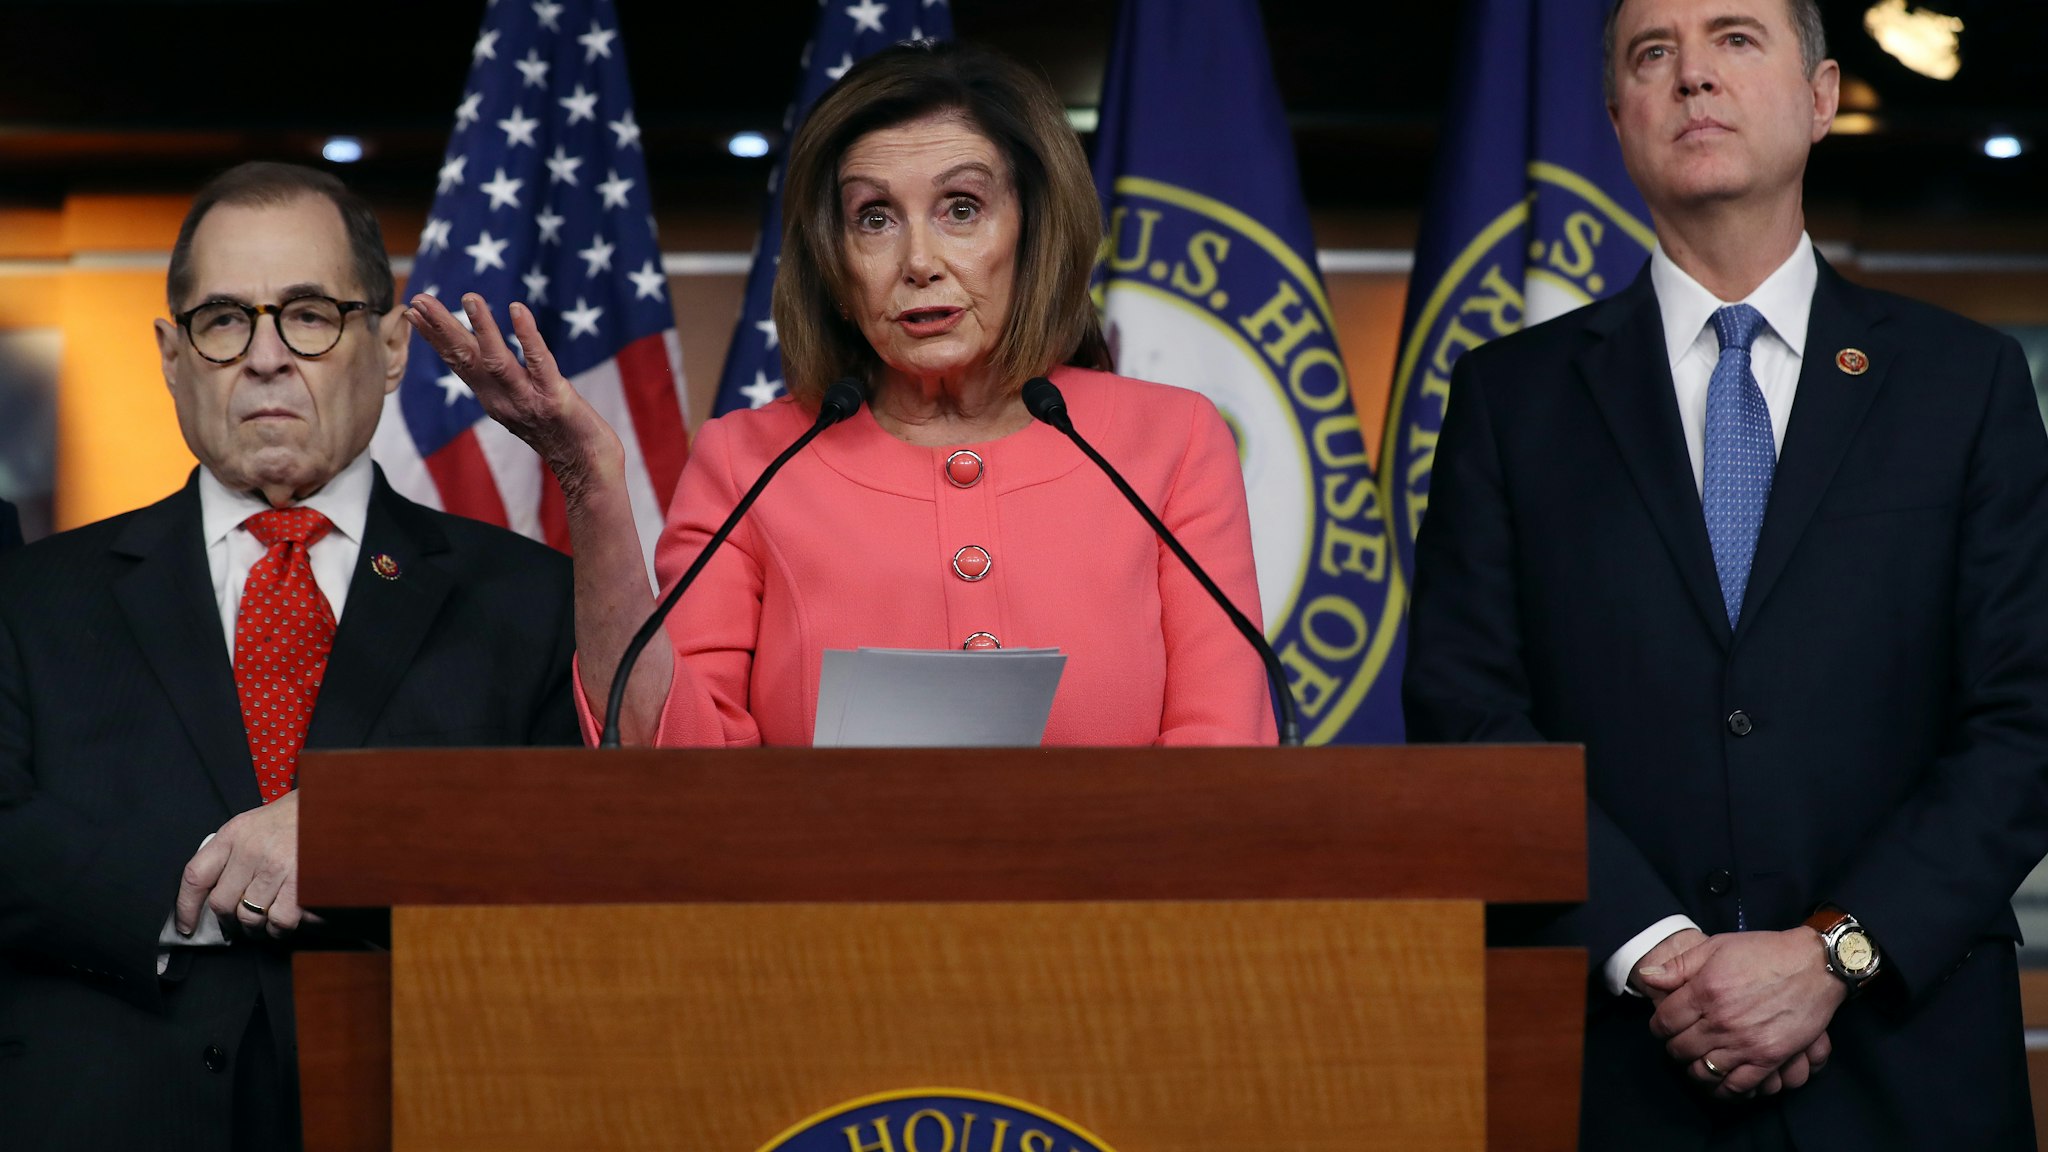 WASHINGTON, DC - JANUARY 15: U.S. Speaker of the House Nancy Pelosi (D-CA) (C) announces that Rep. Jerrold Nadler (D-NY) (L) and Rep. Adam Schiff (D-CA) will lead the seven managers of the Senate impeachment trial of President Donald Trump at the U.S. Capitol January 15, 2020 in Washington, DC. The House of Representatives is scheduled to vote to send the articles of impeachment to the Senate later in the day and Senate Majority Leader Mitch McConnell (R-KY) said the trial will begin next Tuesday. (Photo by Chip Somodevilla/Getty Images)